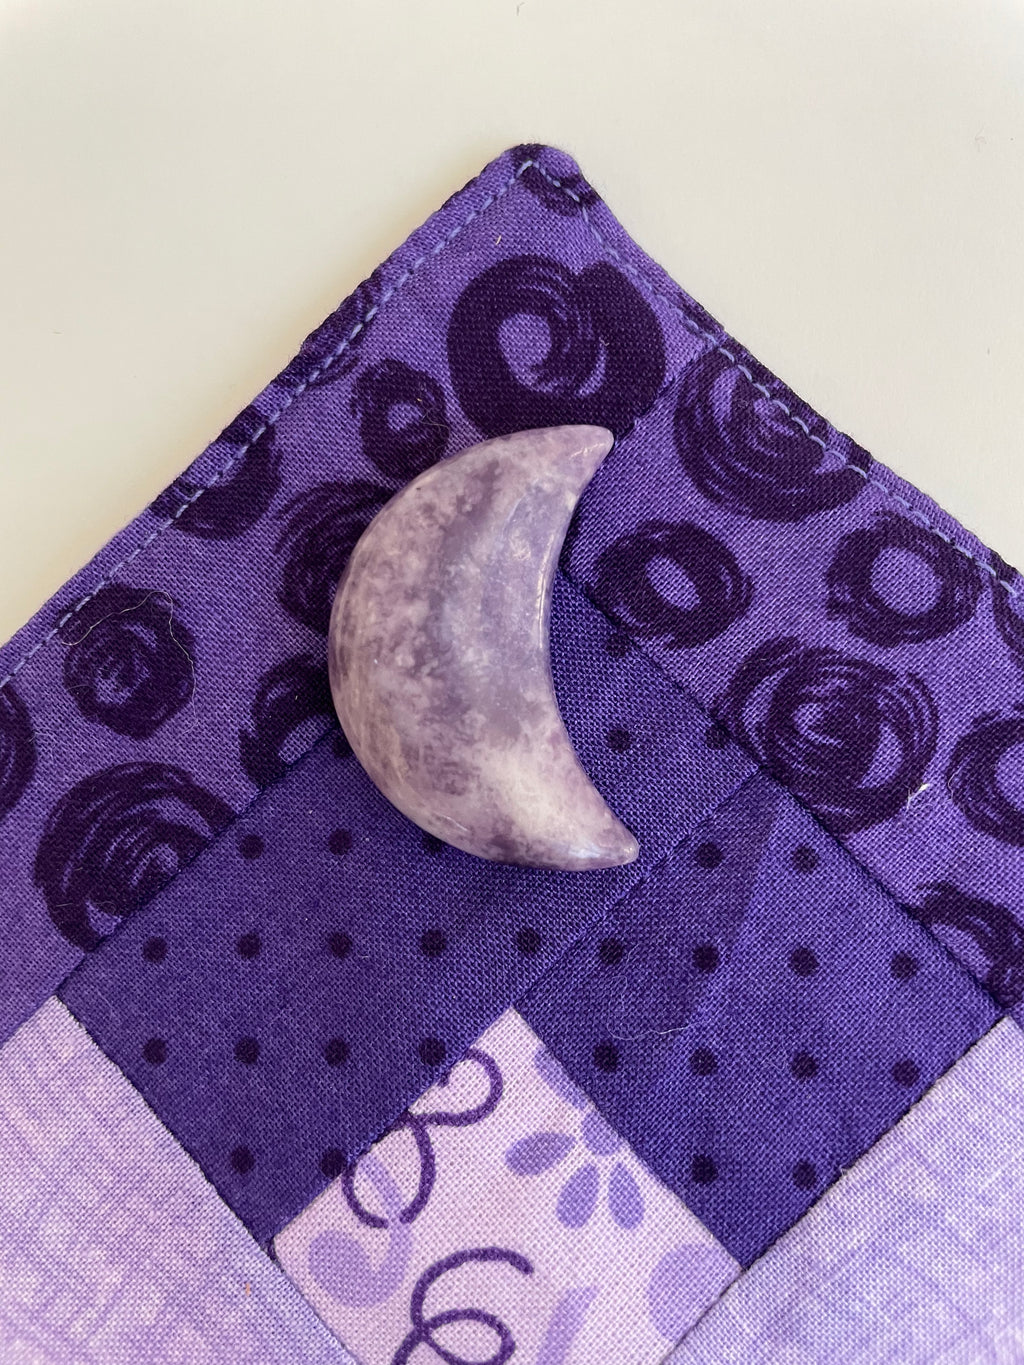 ﻿This sparkly little lavender-colored lepidolite crescent moon can be used for meditation, healing, for your altar, on/near your computer or as décor for any room in your home or office. Easy to slip right into your pocket so you can take the energy of lepidolite everywhere you go. Approx. 1¼". Cost is $6. 